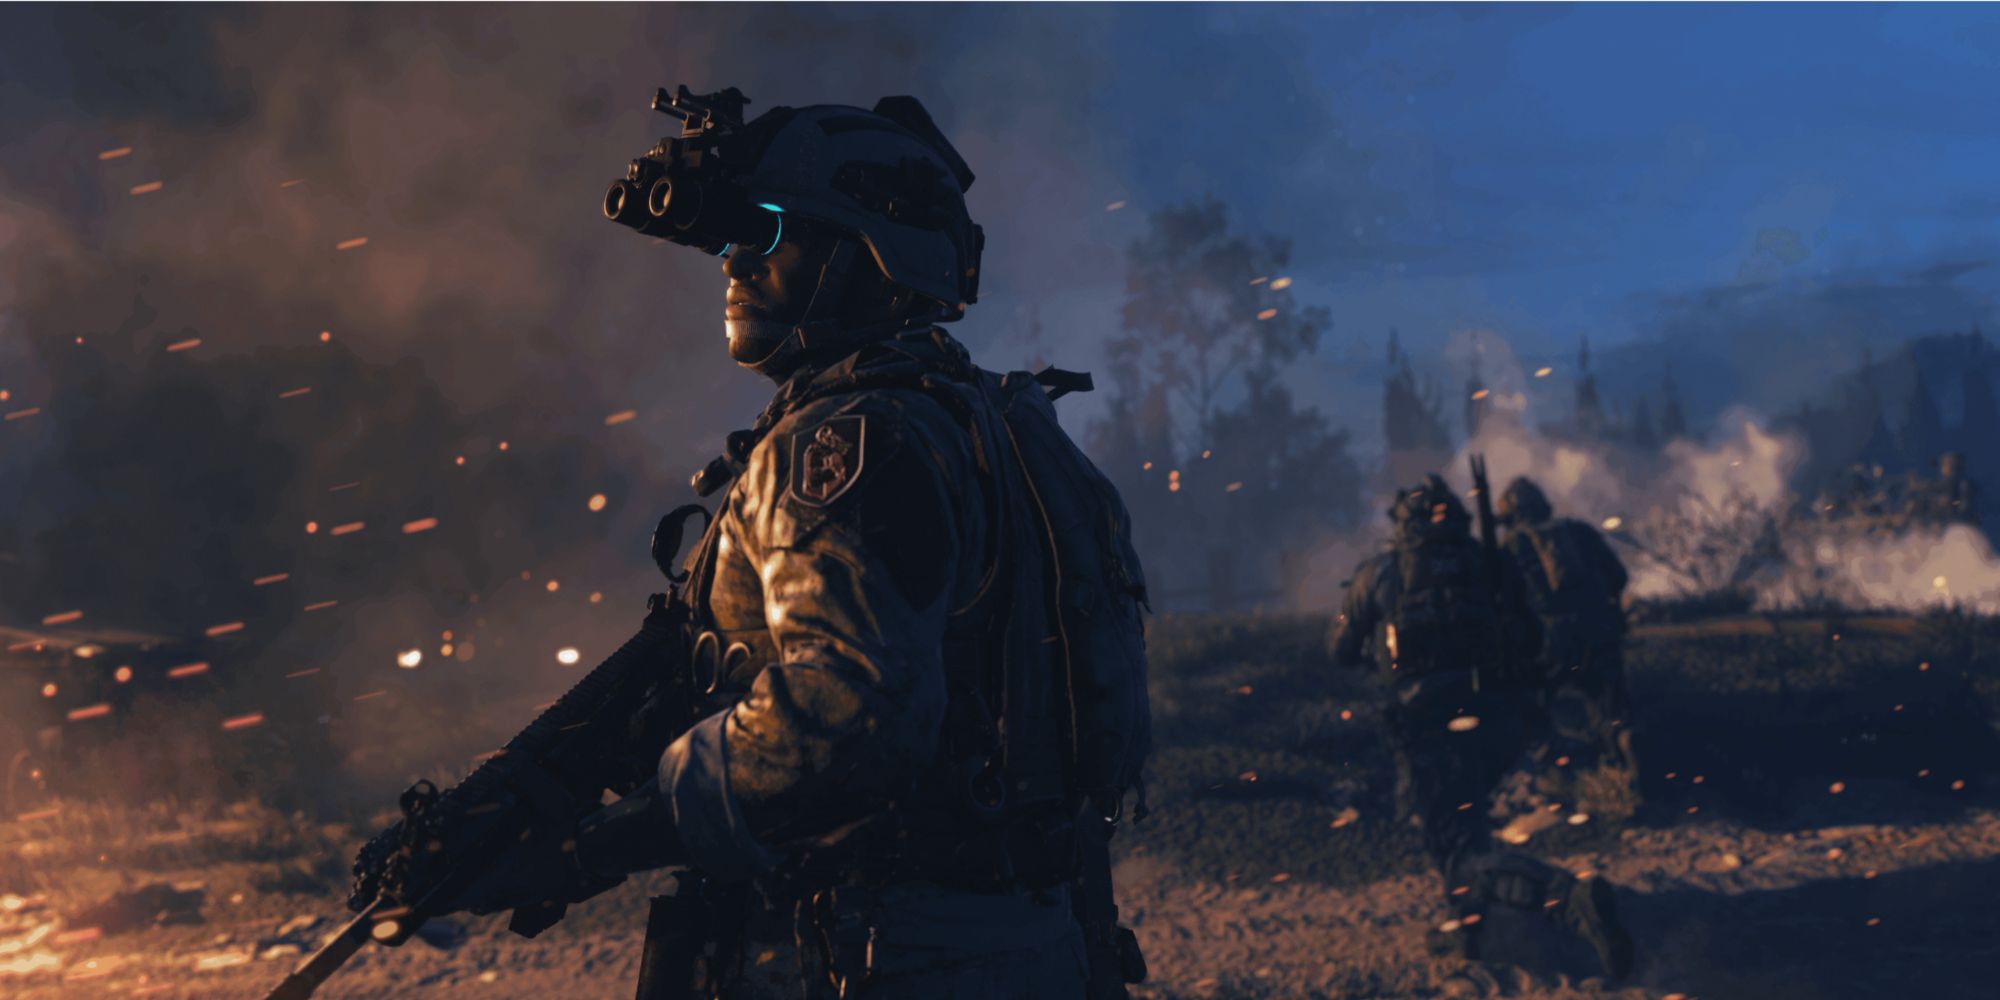 call of duty soldier wearing nightvision goggles